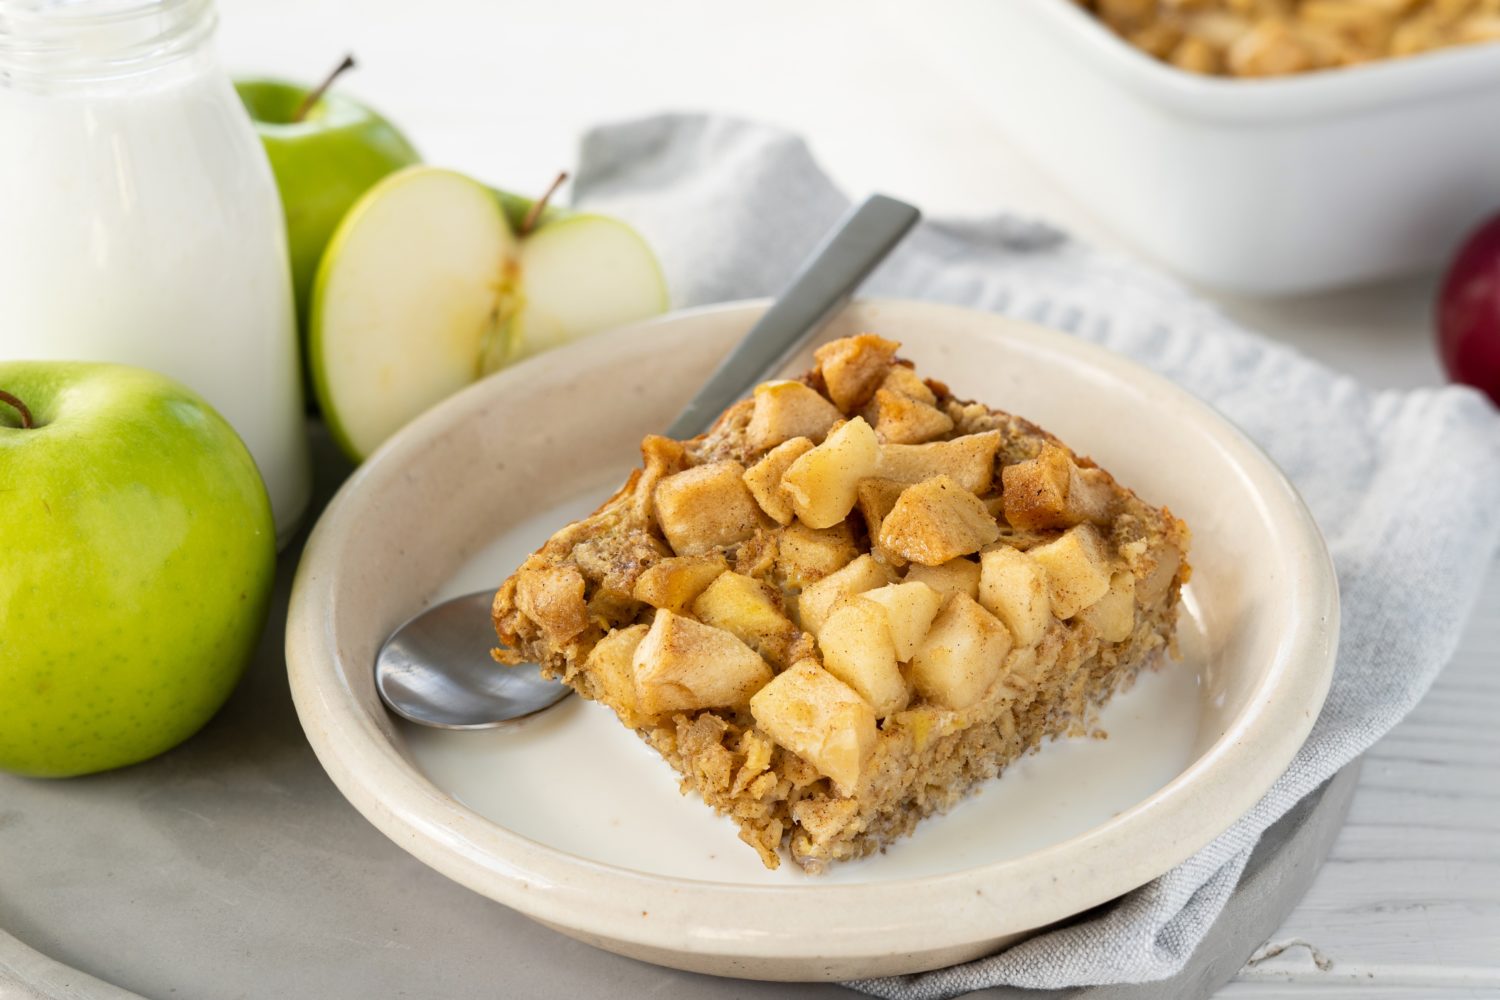 a slice of baked oatmeal with apples on top